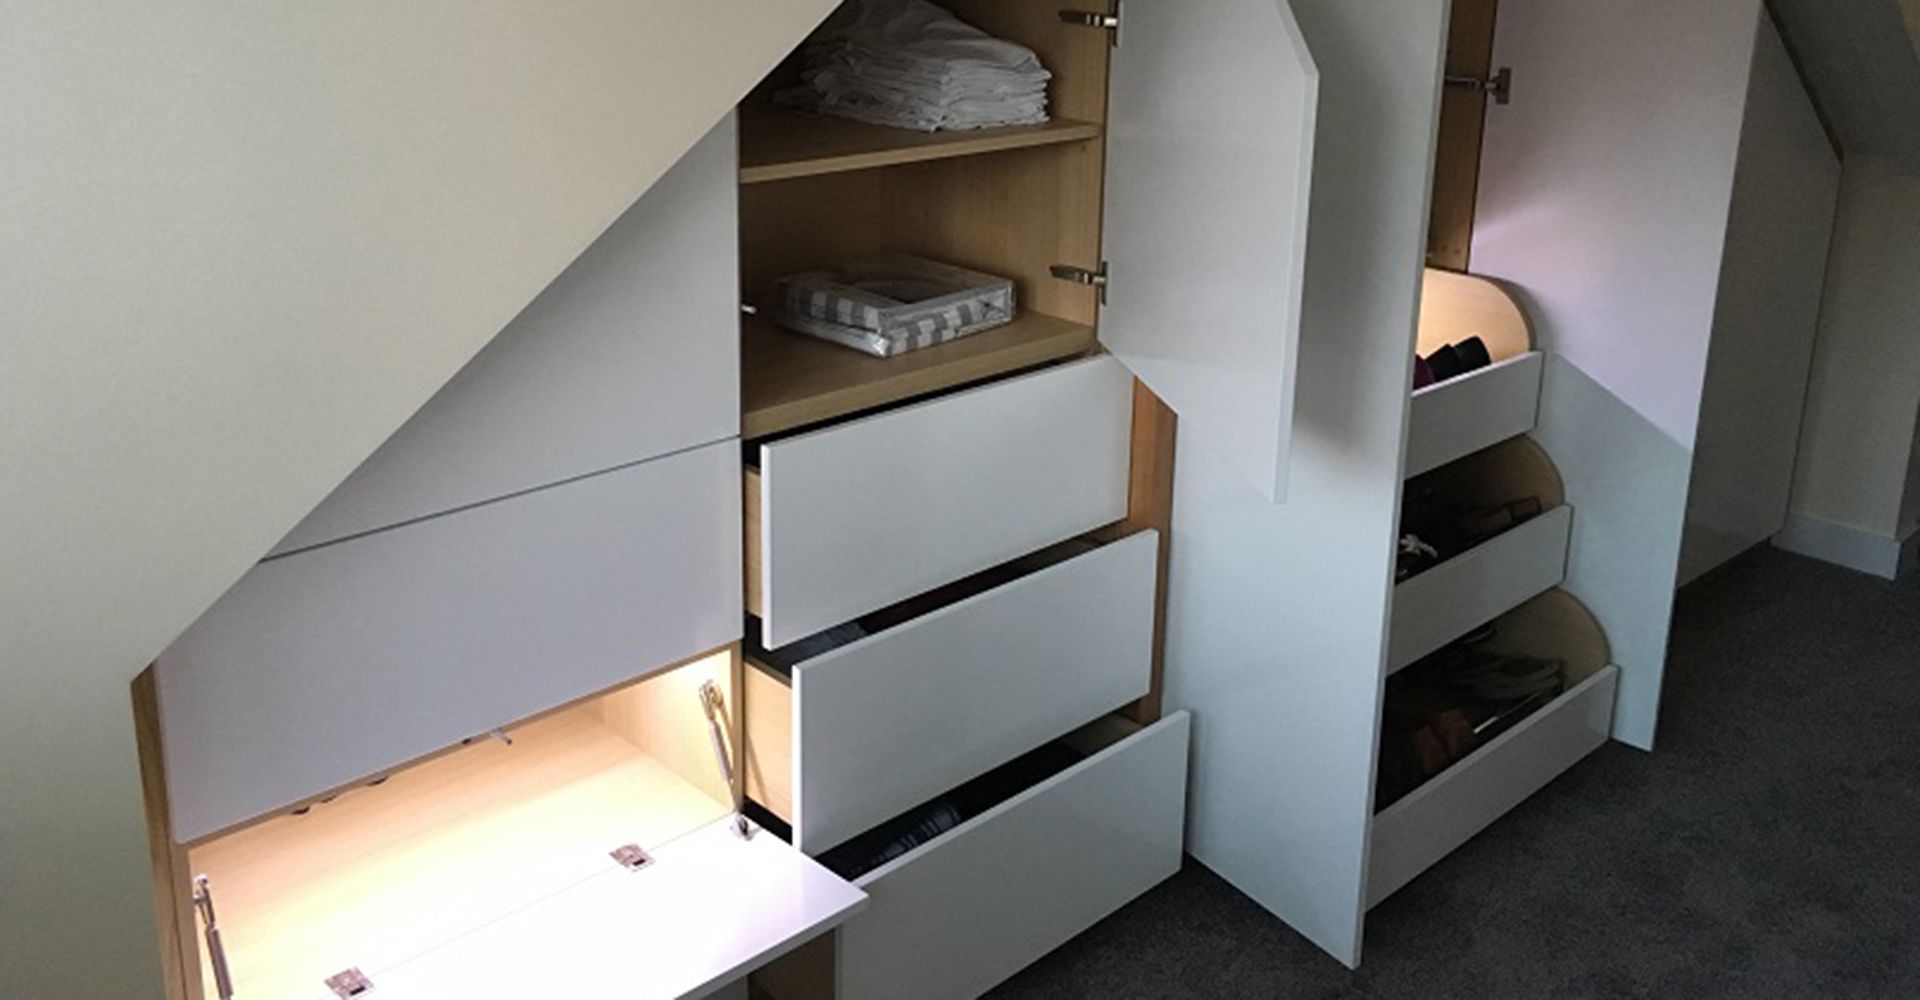 Built In Wardrobes Kent | Fitted Wardrobes | Spittlywood Ltd In Kent Wardrobes (View 13 of 20)